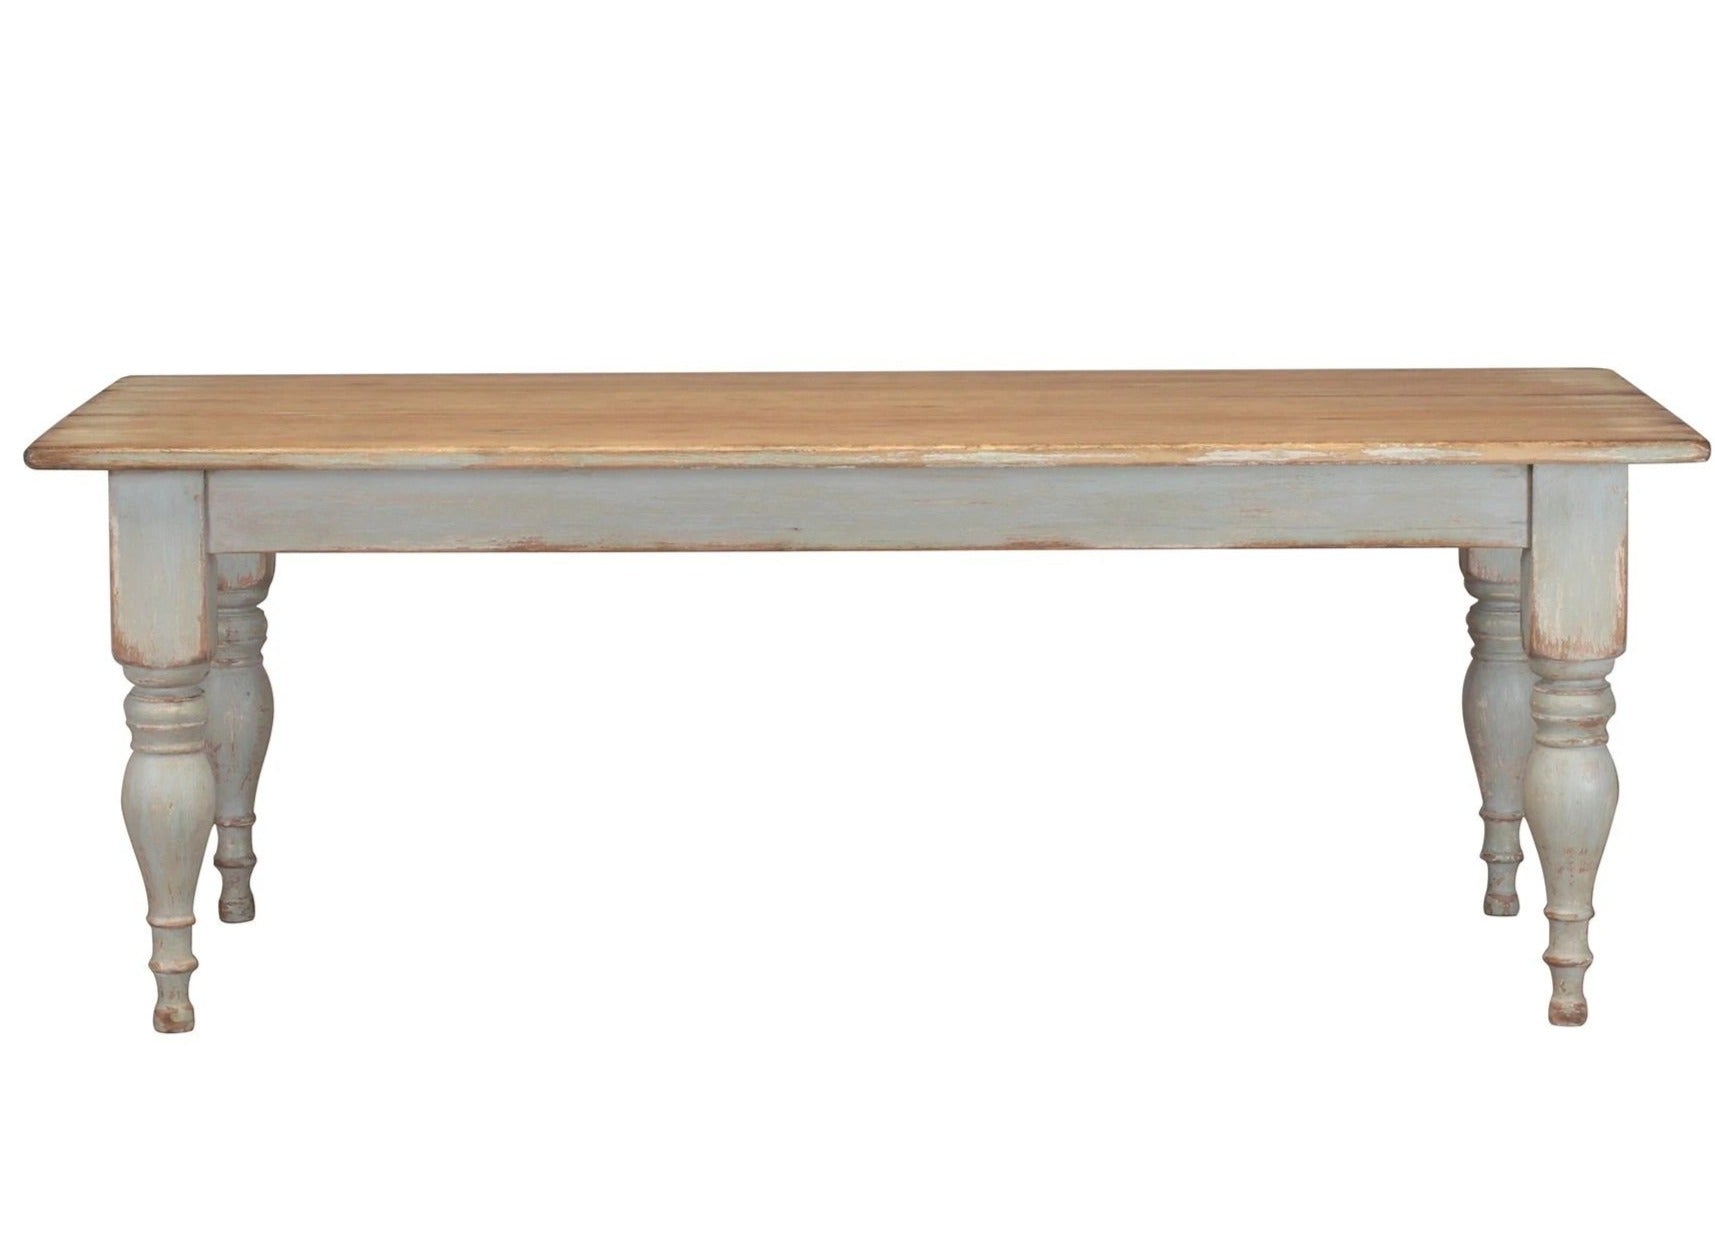 Park Hill Collection Painted Farmhouse Table for sale, Pottery Barn Farmhouse Tables for sale